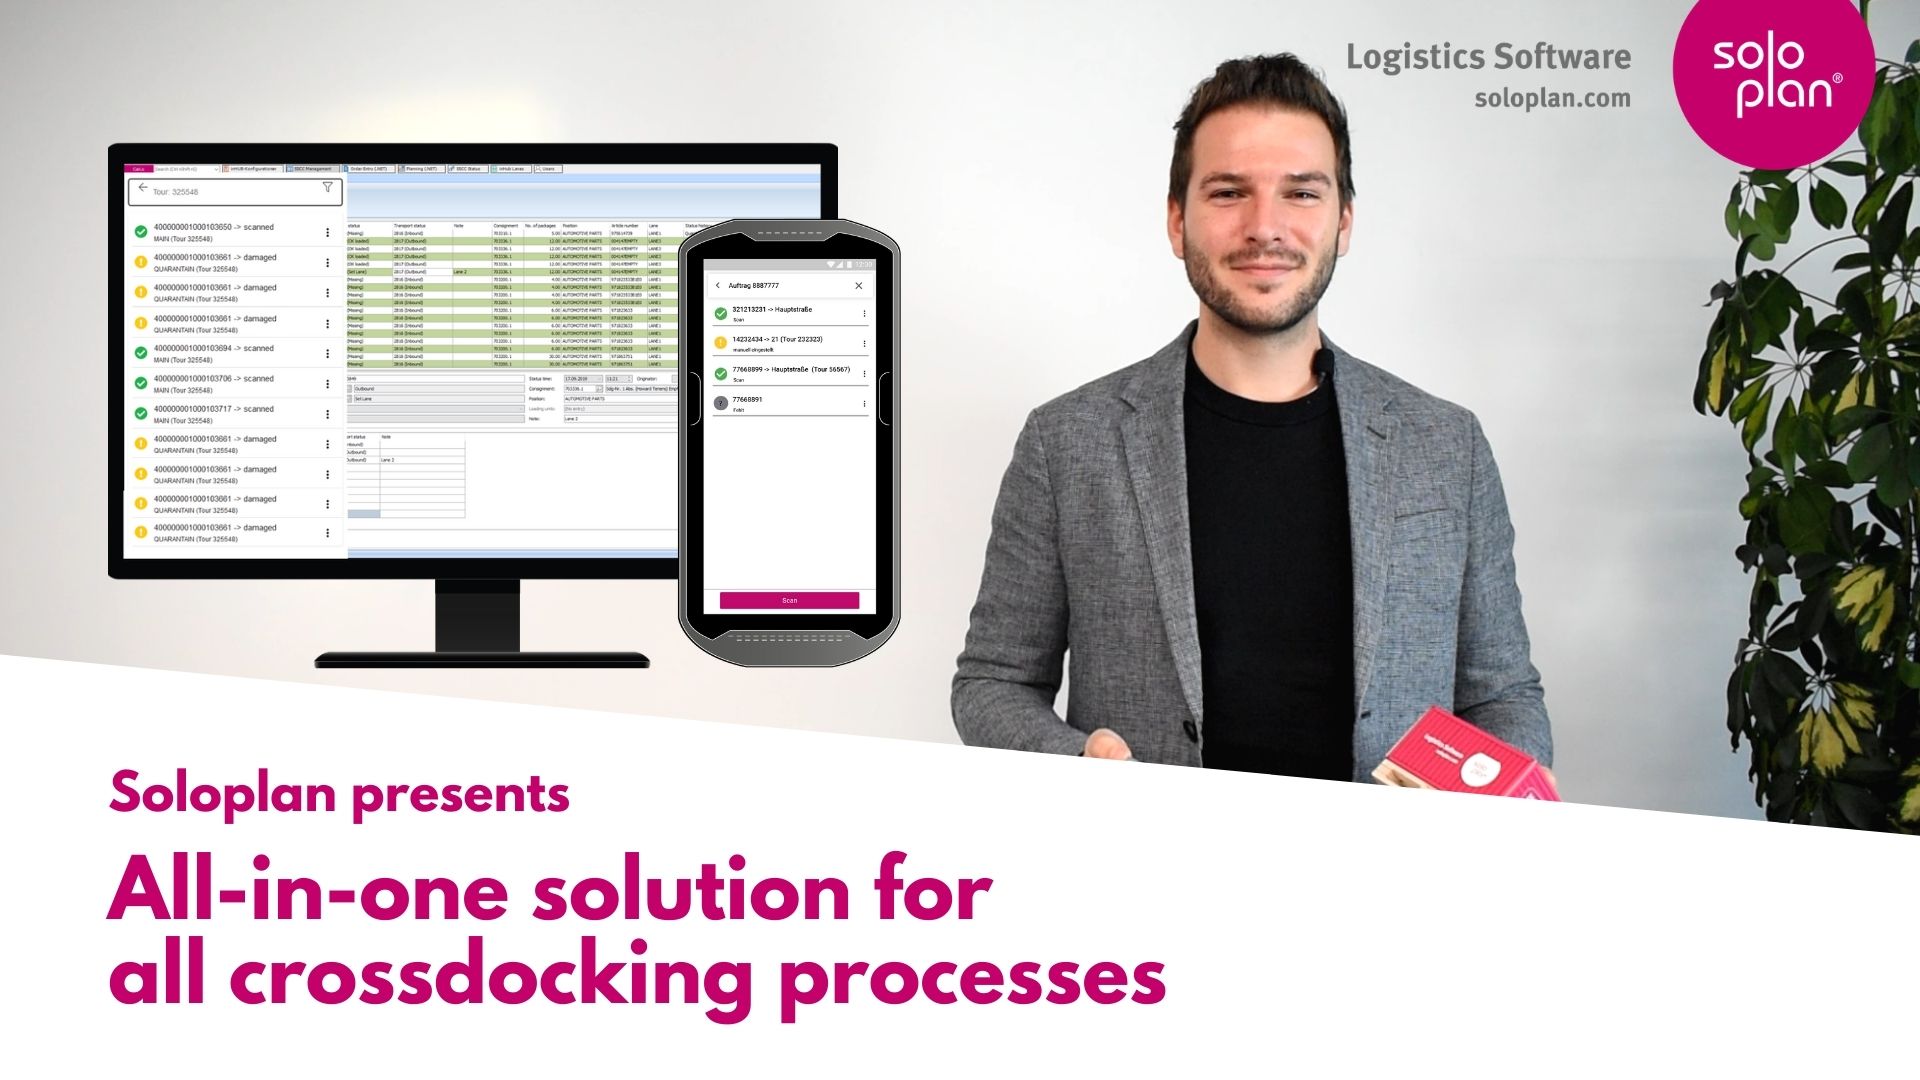 The complete solution of all CrossDocking processes